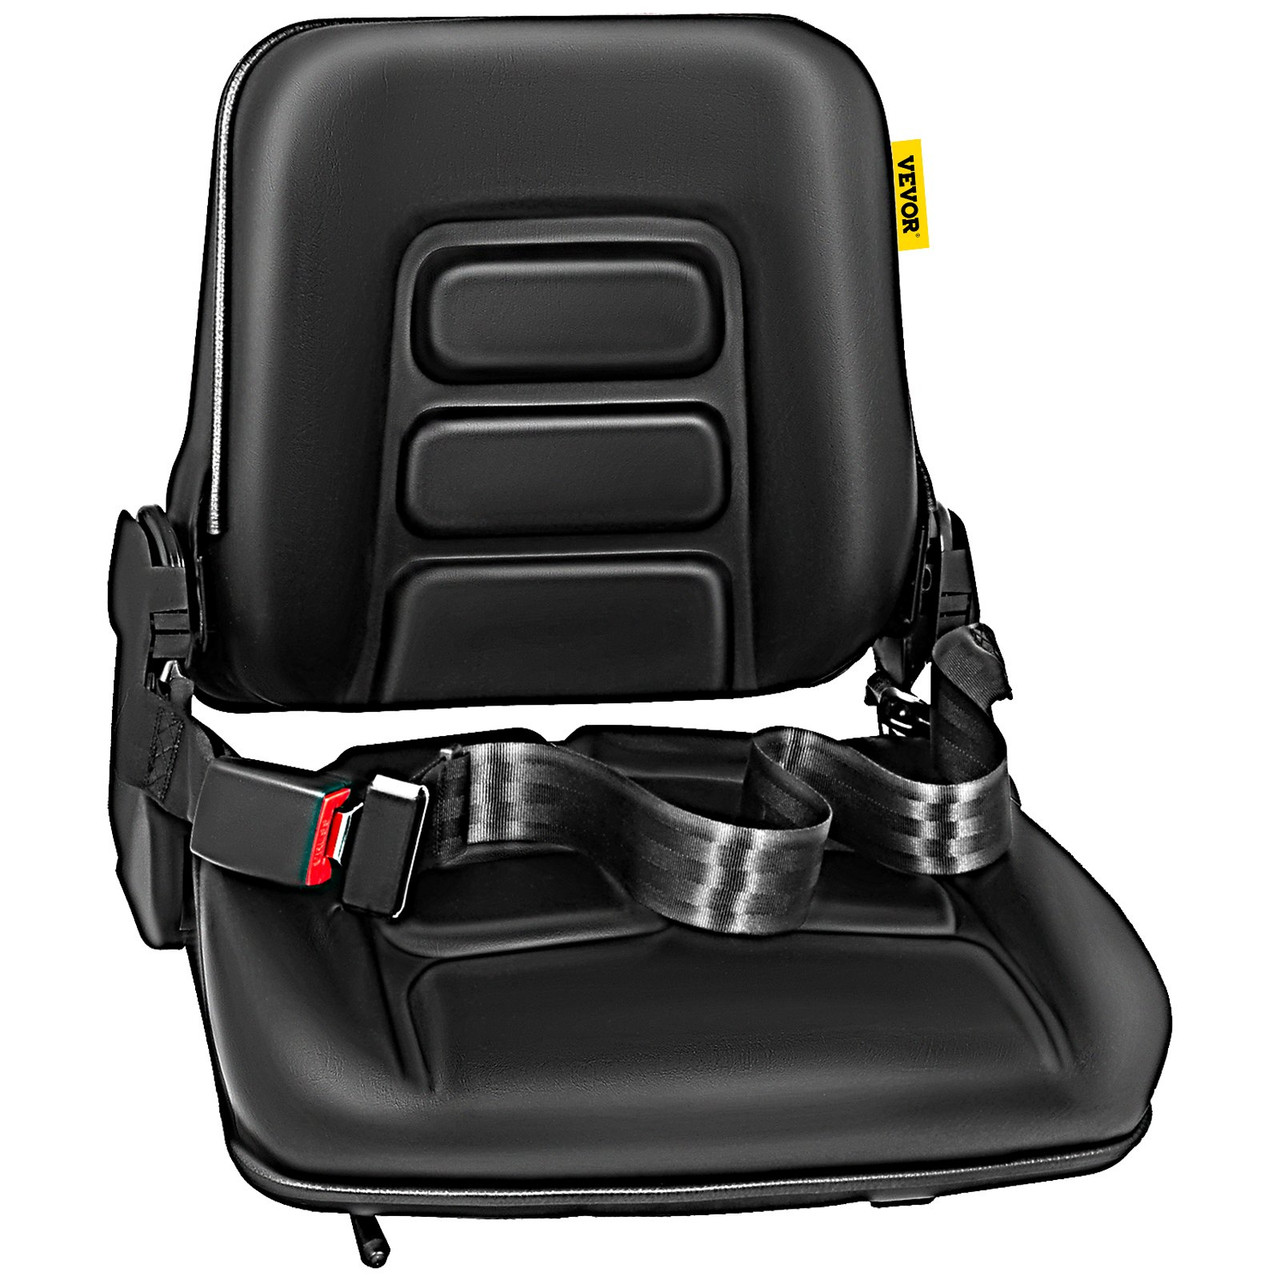 Universal Adjustable Forklift Seat with Safety Belt, Full Suspension Seat Replacement for Heavy Mechanical Seat